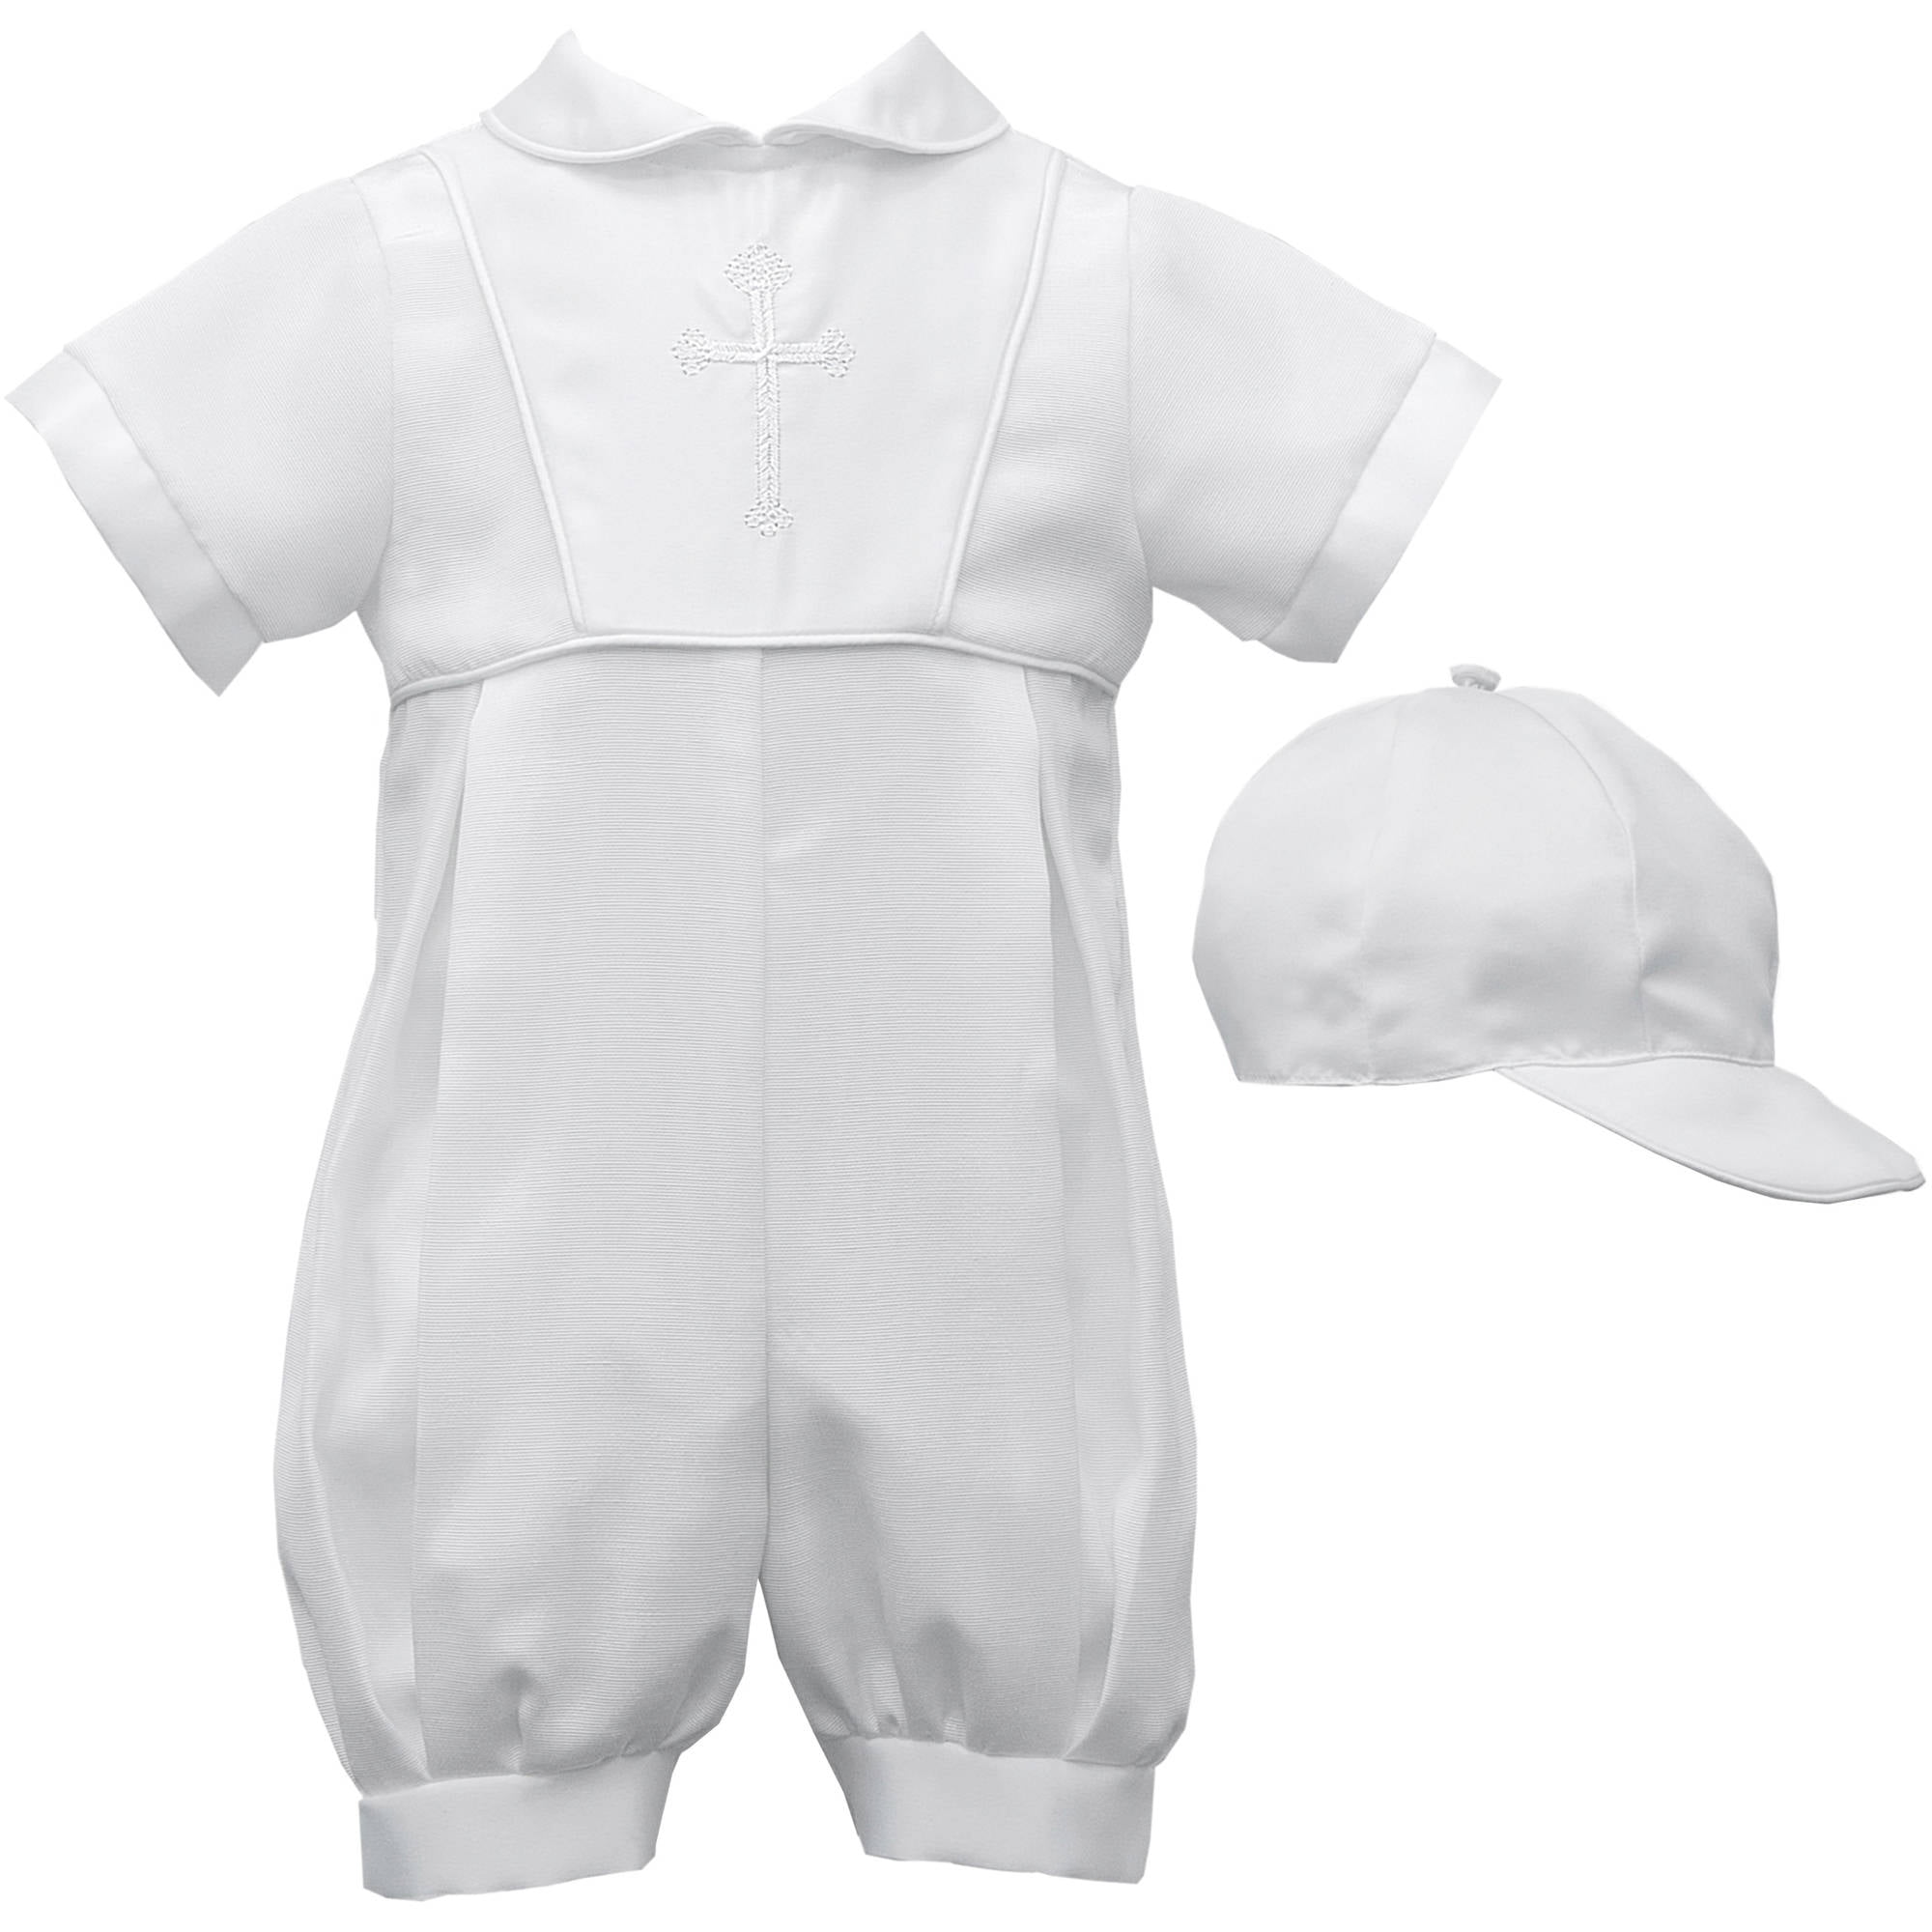 New Infant Boys Christening Baptism Special Gown size XS S M L XL cross 